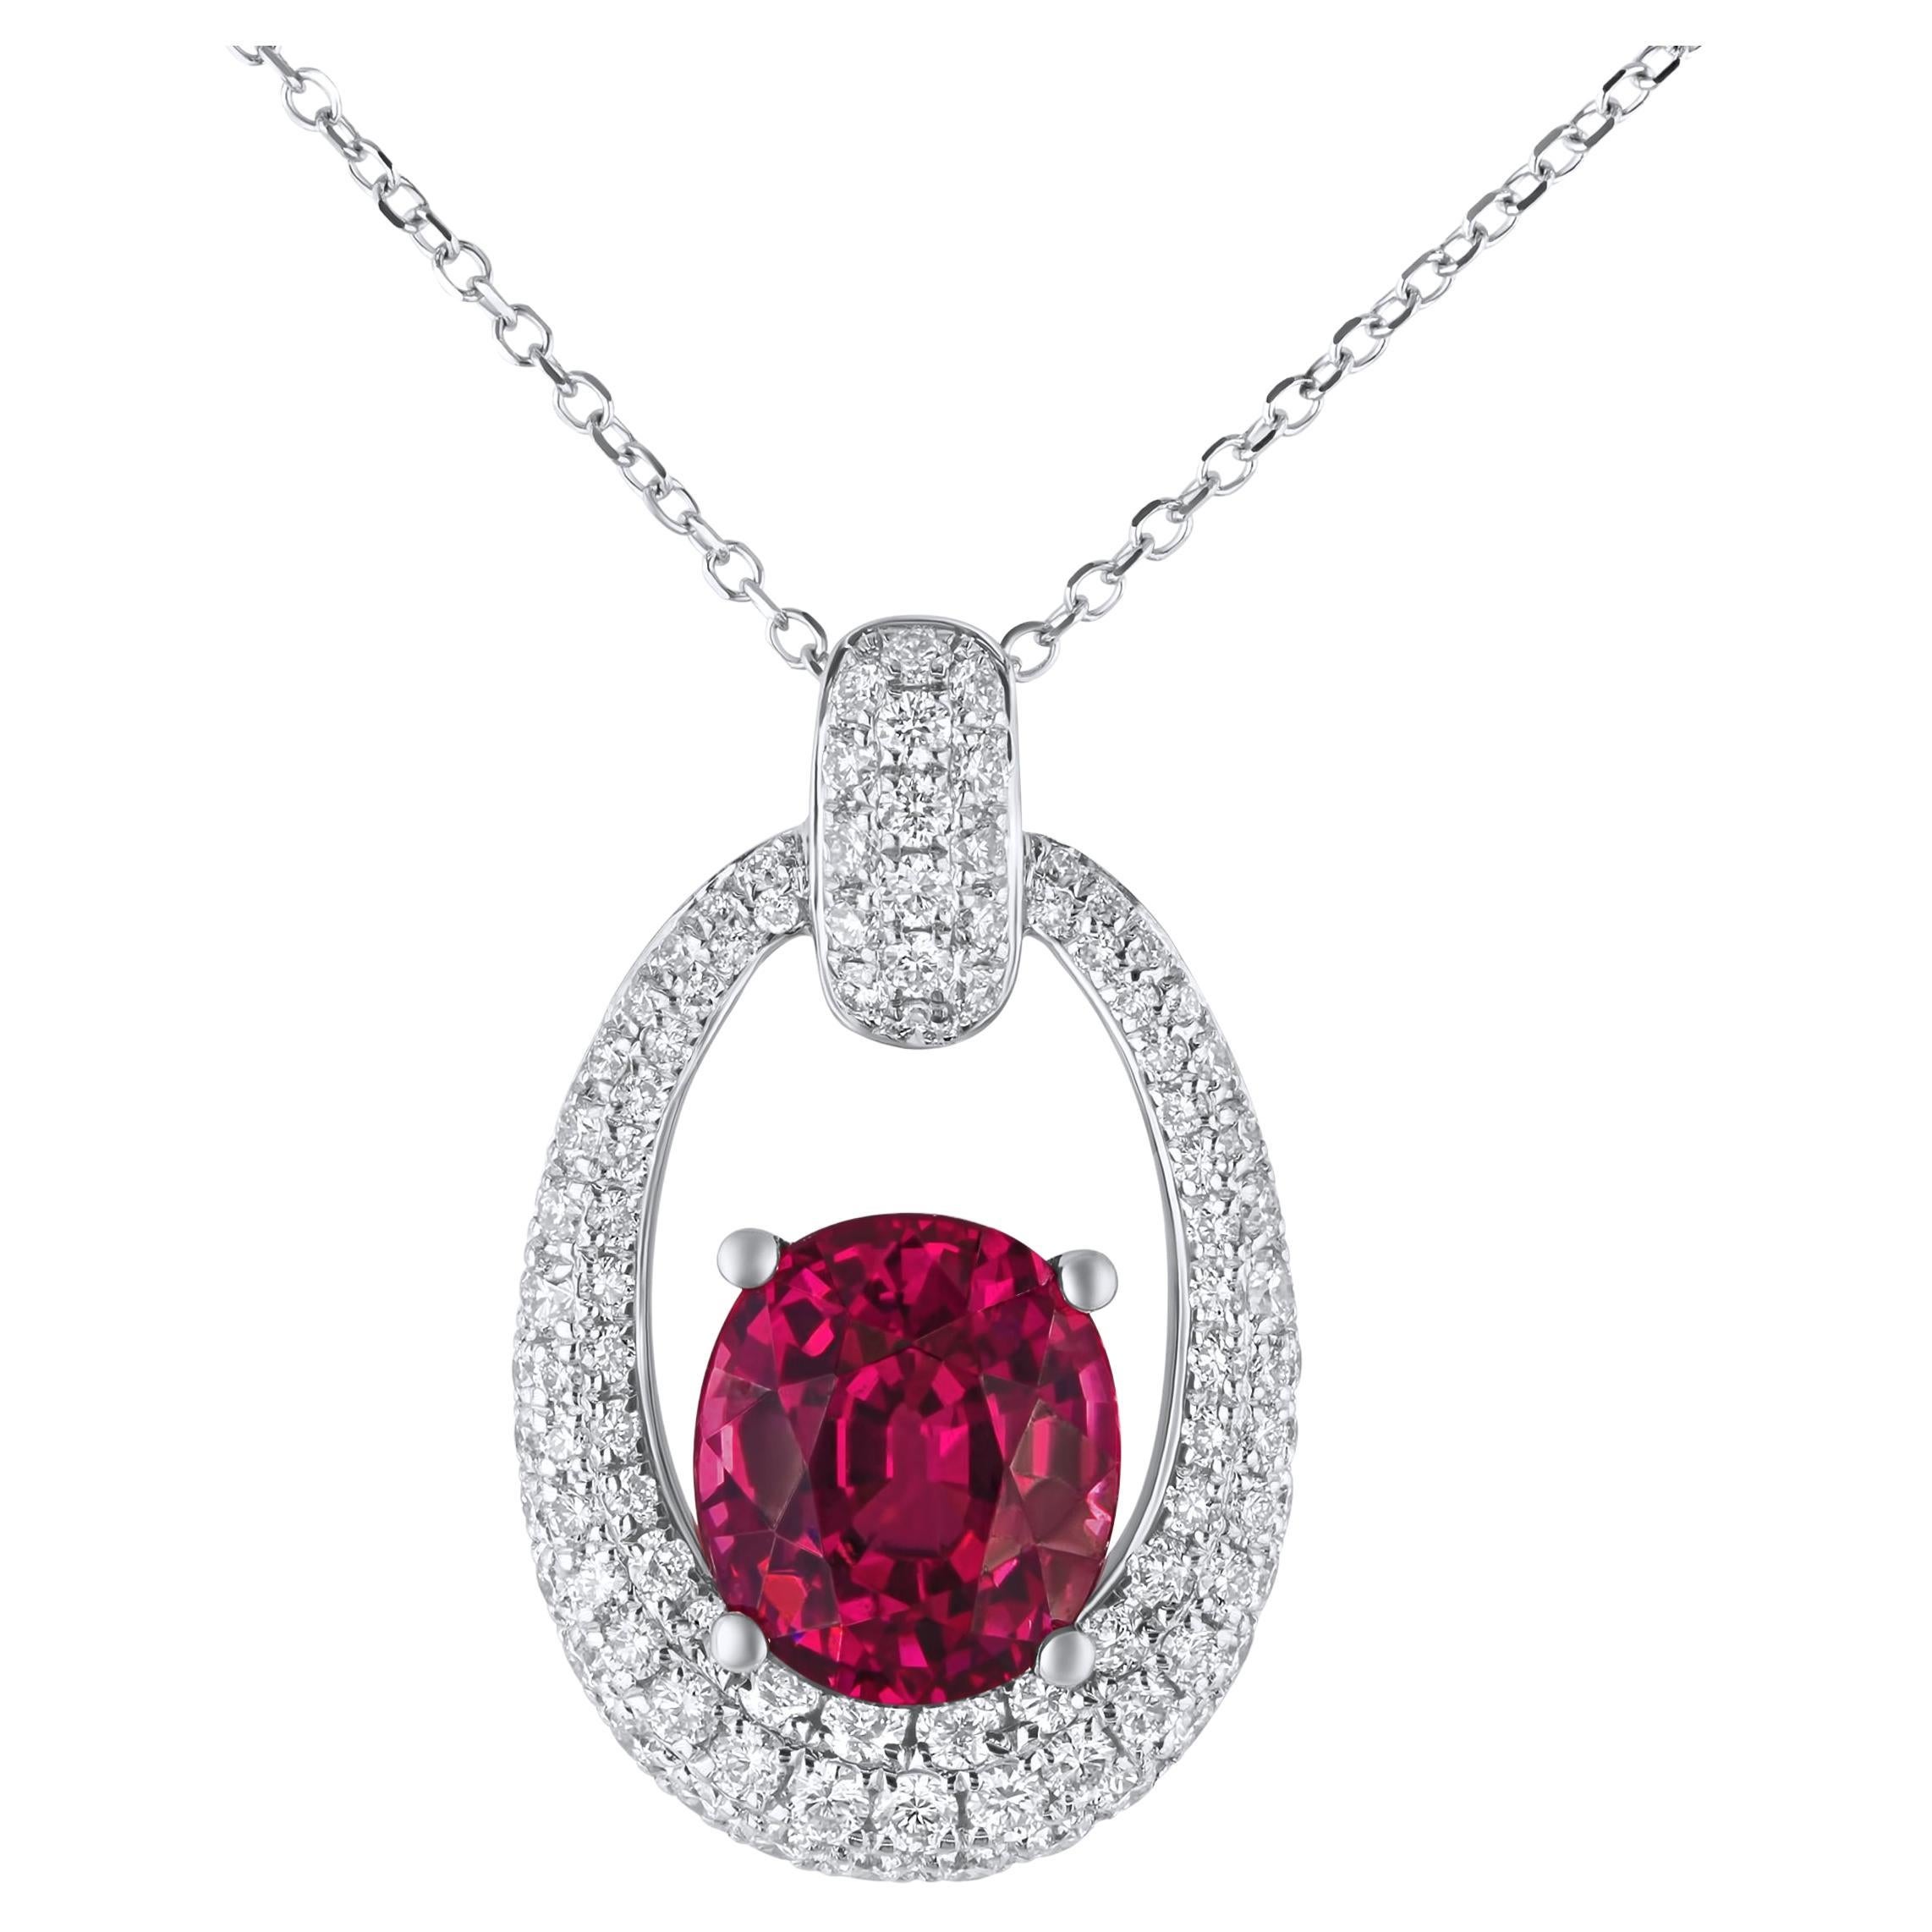 1.72 Carat Oval Exotic Garnet Pendant with 0.69 Ct Diamonds in 18W Gold ref1505 For Sale